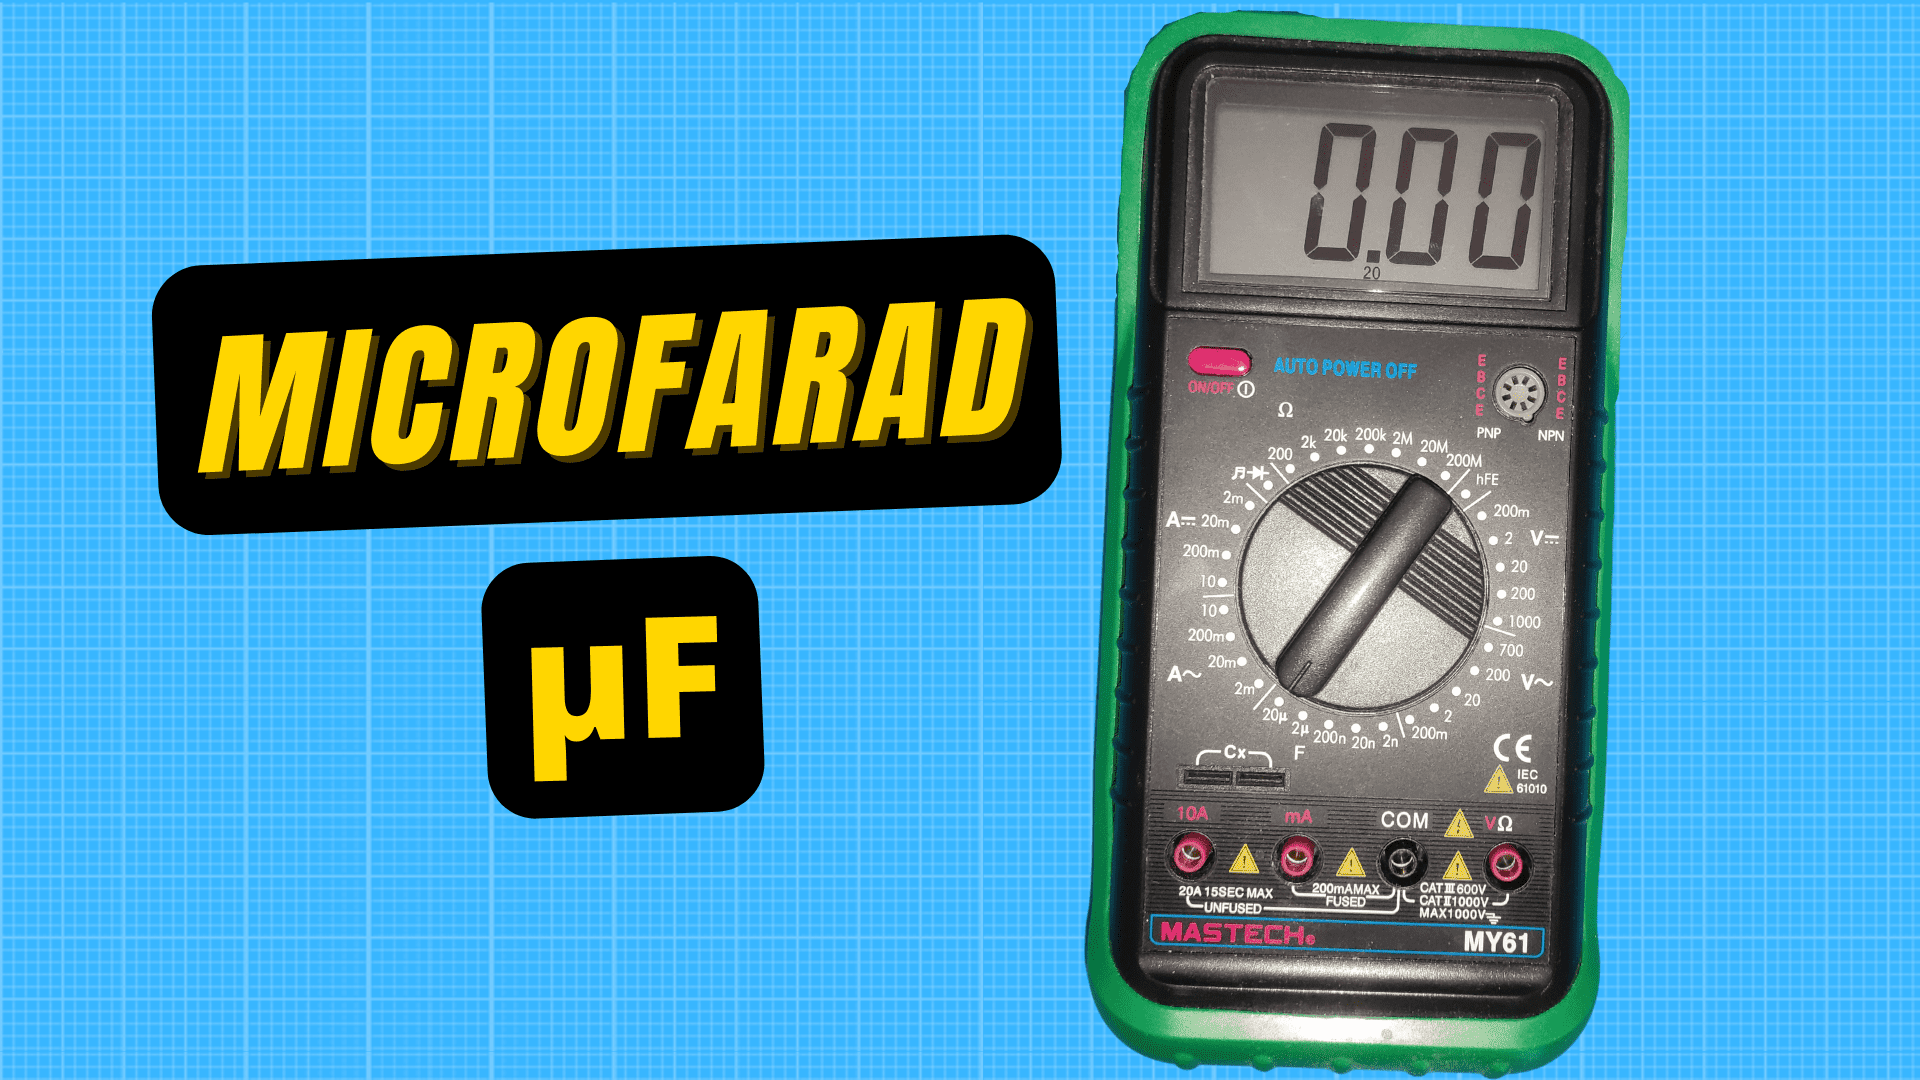 What is the symbol for microfarads on a multimeter?